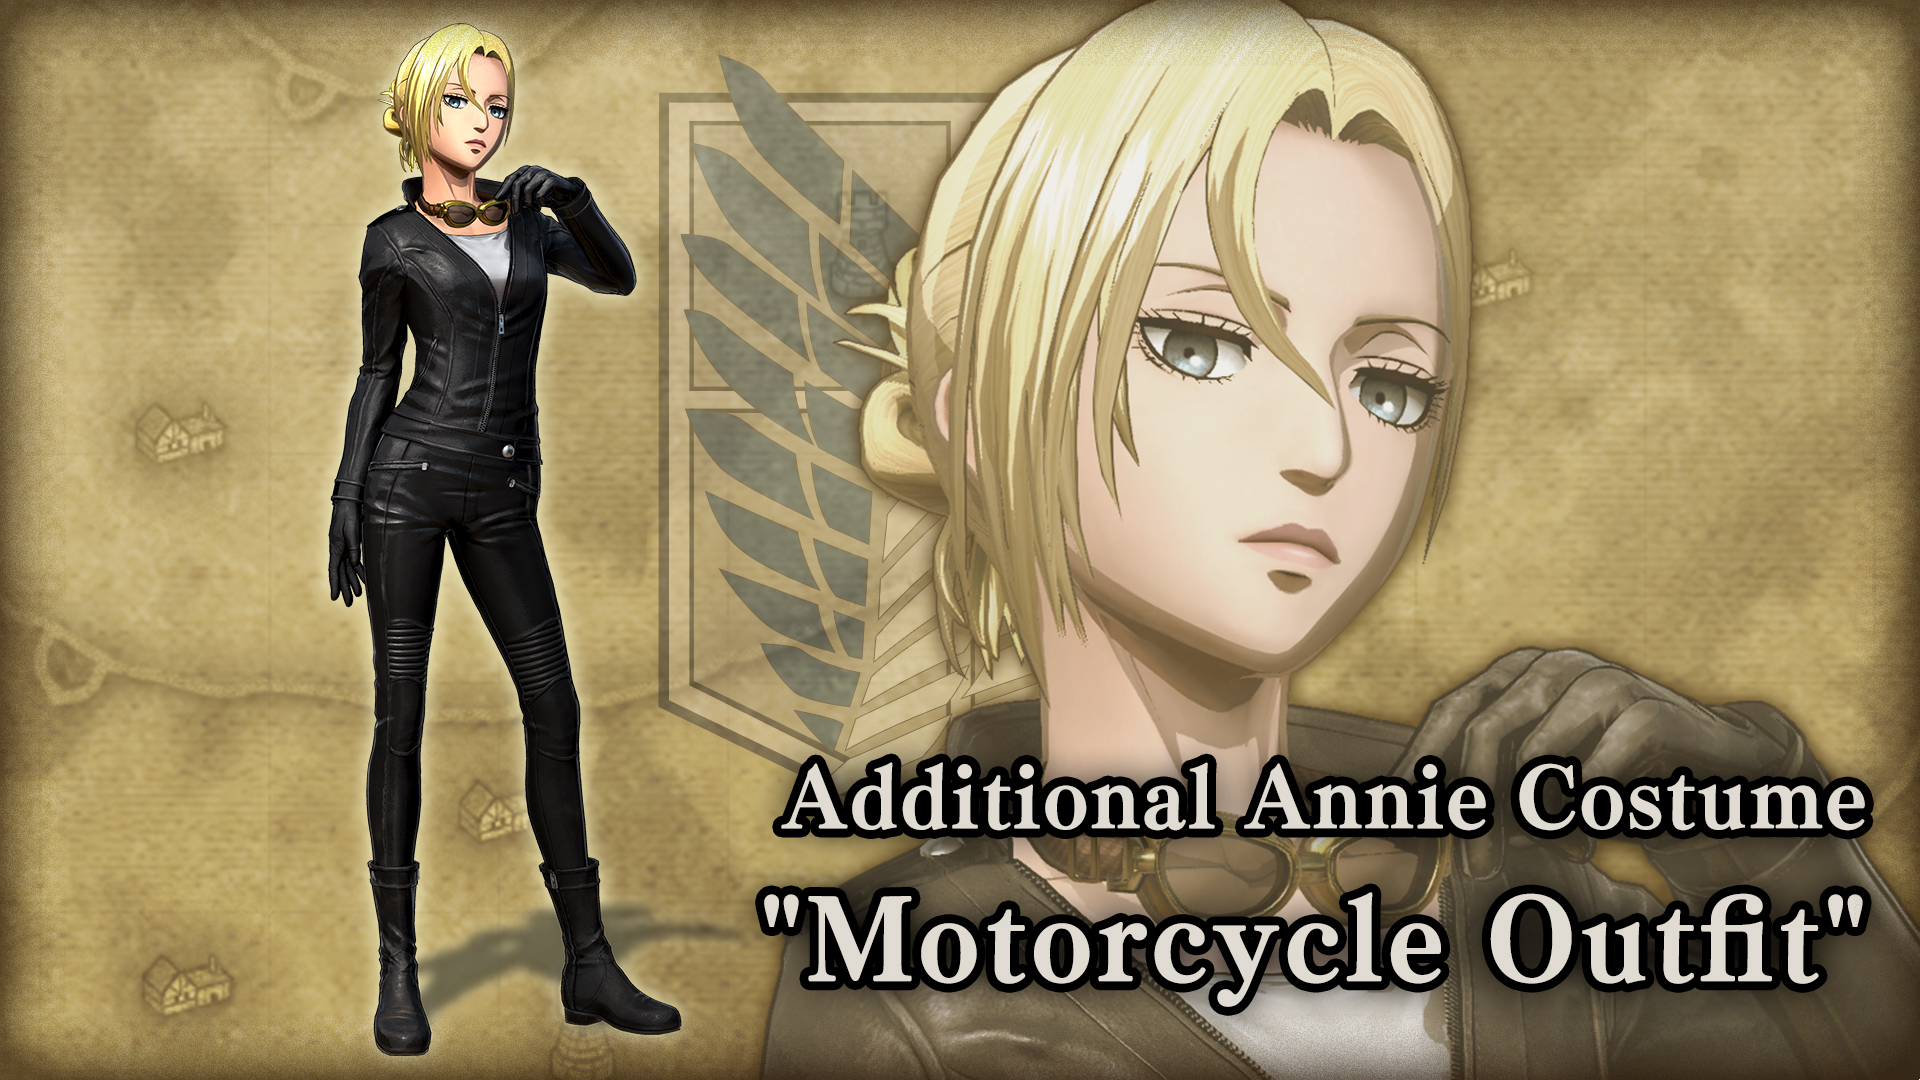 Additional Annie Costume: "Motorcycle Outfit"